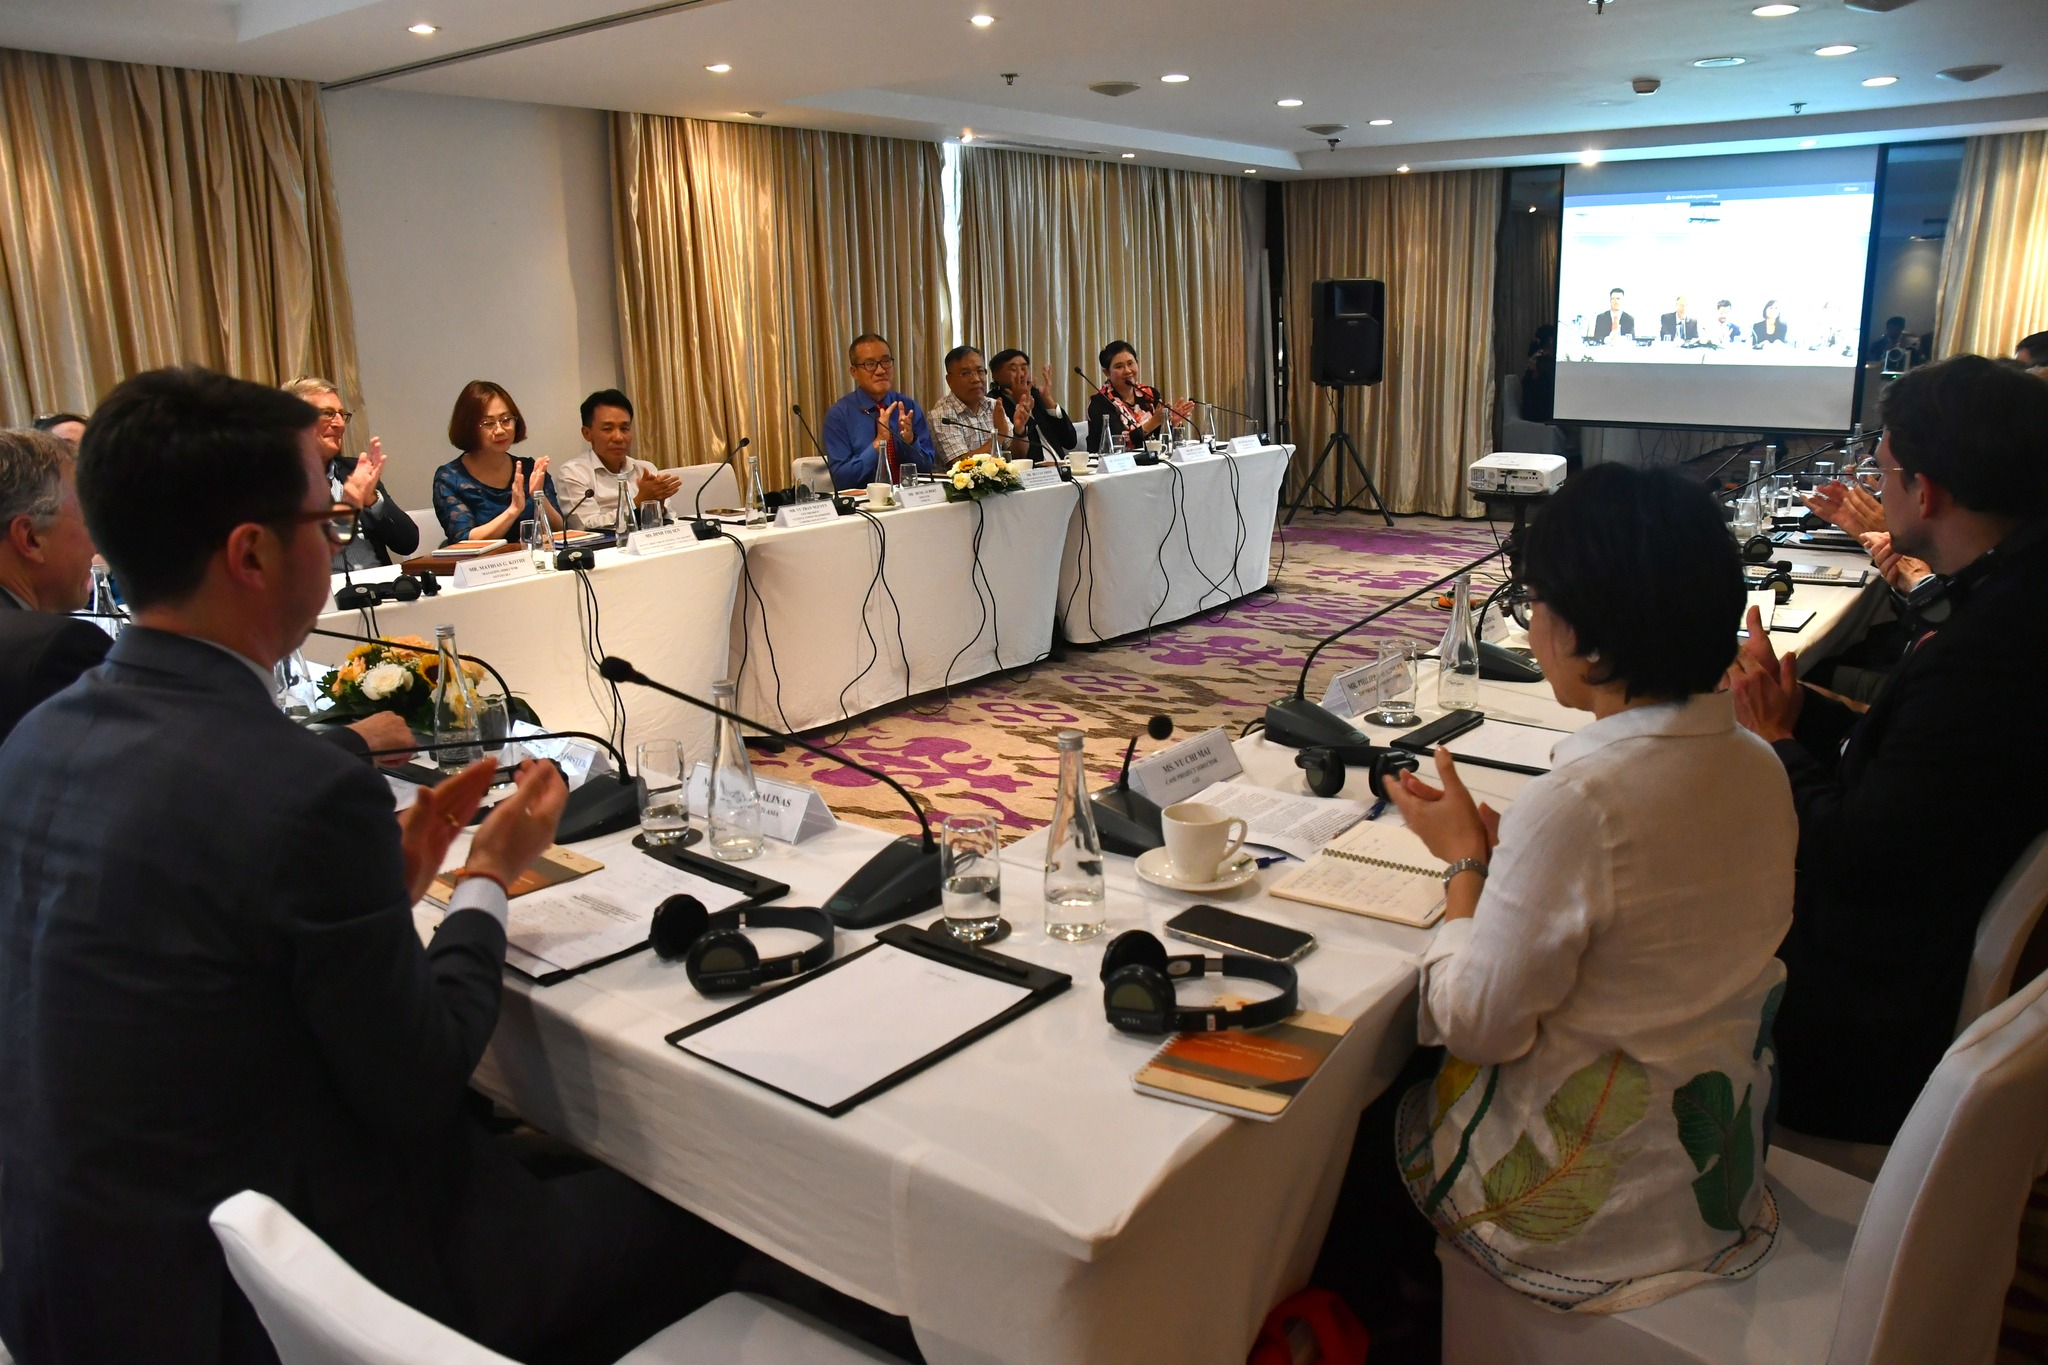 ROUNDTABLE DISCUSSION WITH THE PRIVATE SECTOR ON OPPORTUNITIES AND CHALLENGES IN VIET NAM’S ENERGY TRANSITION